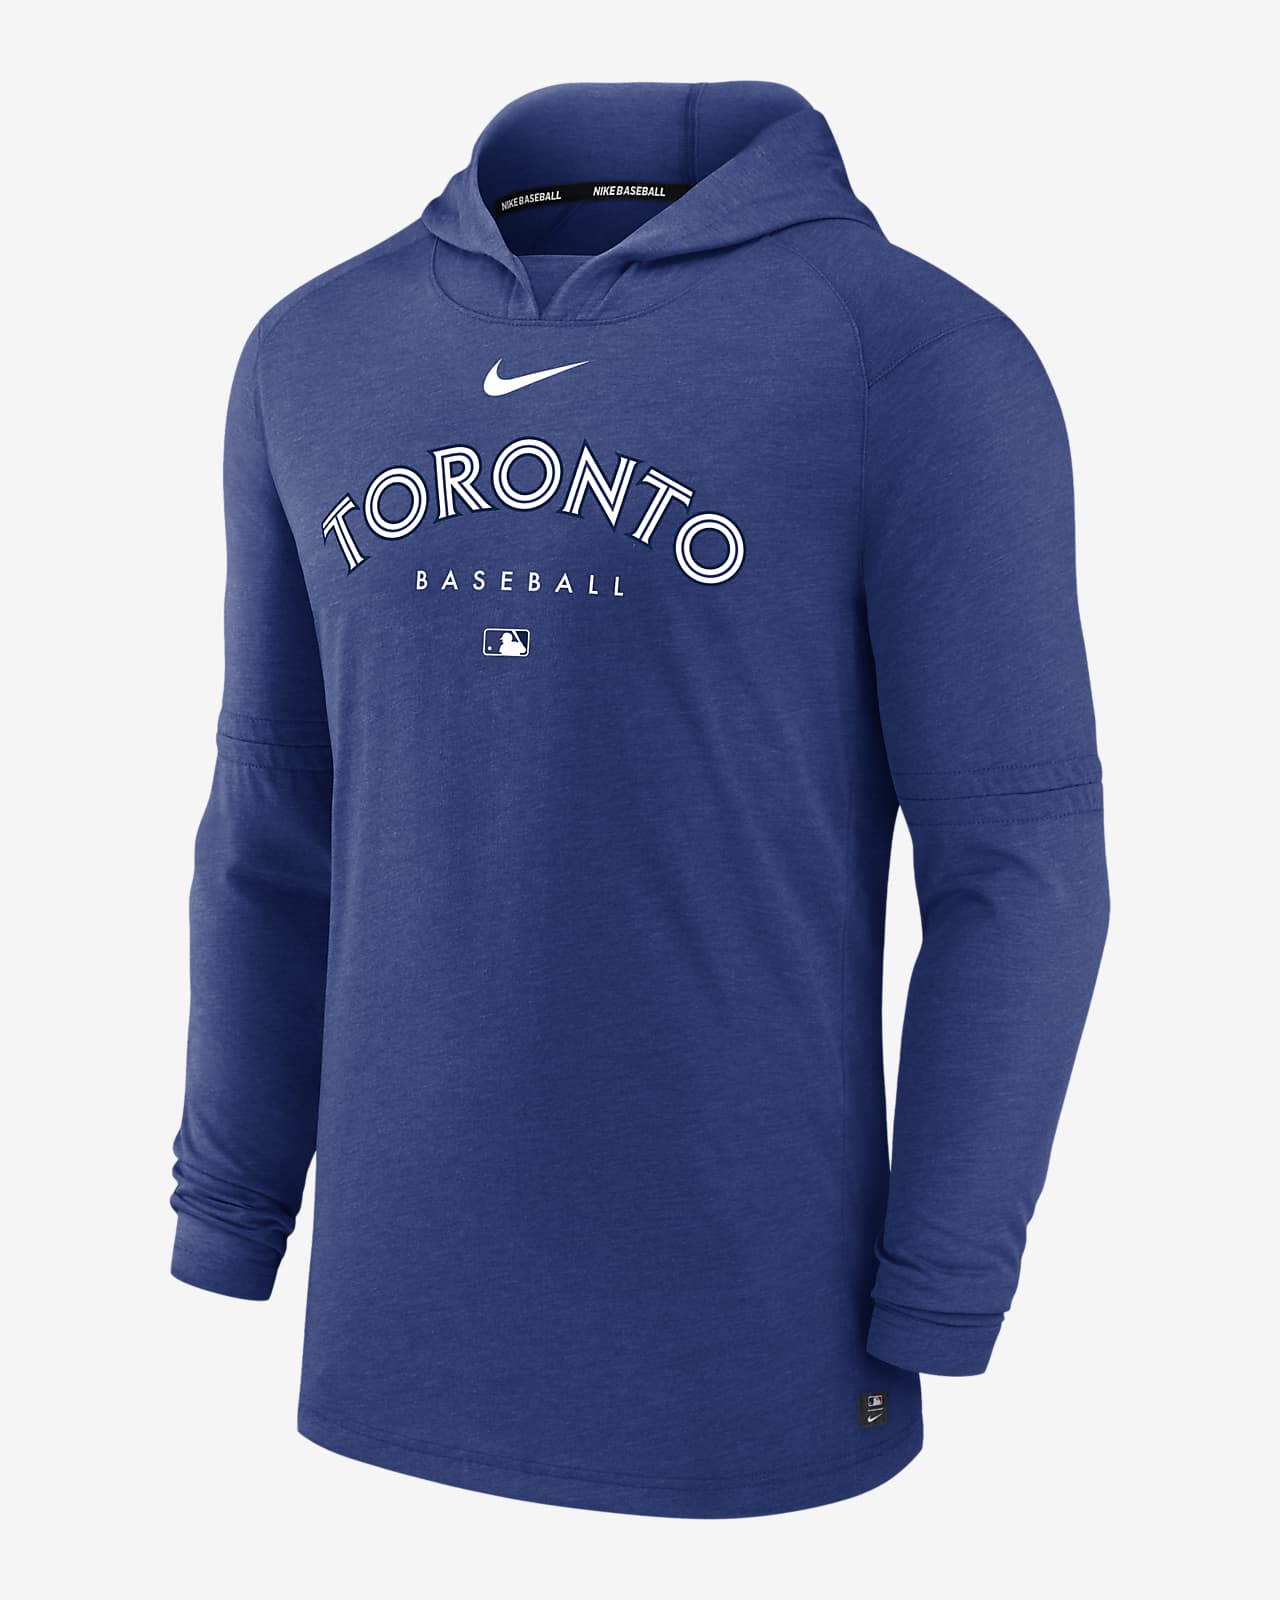 Toronto Blue Jays on X: Rep Canadian colours this long weekend